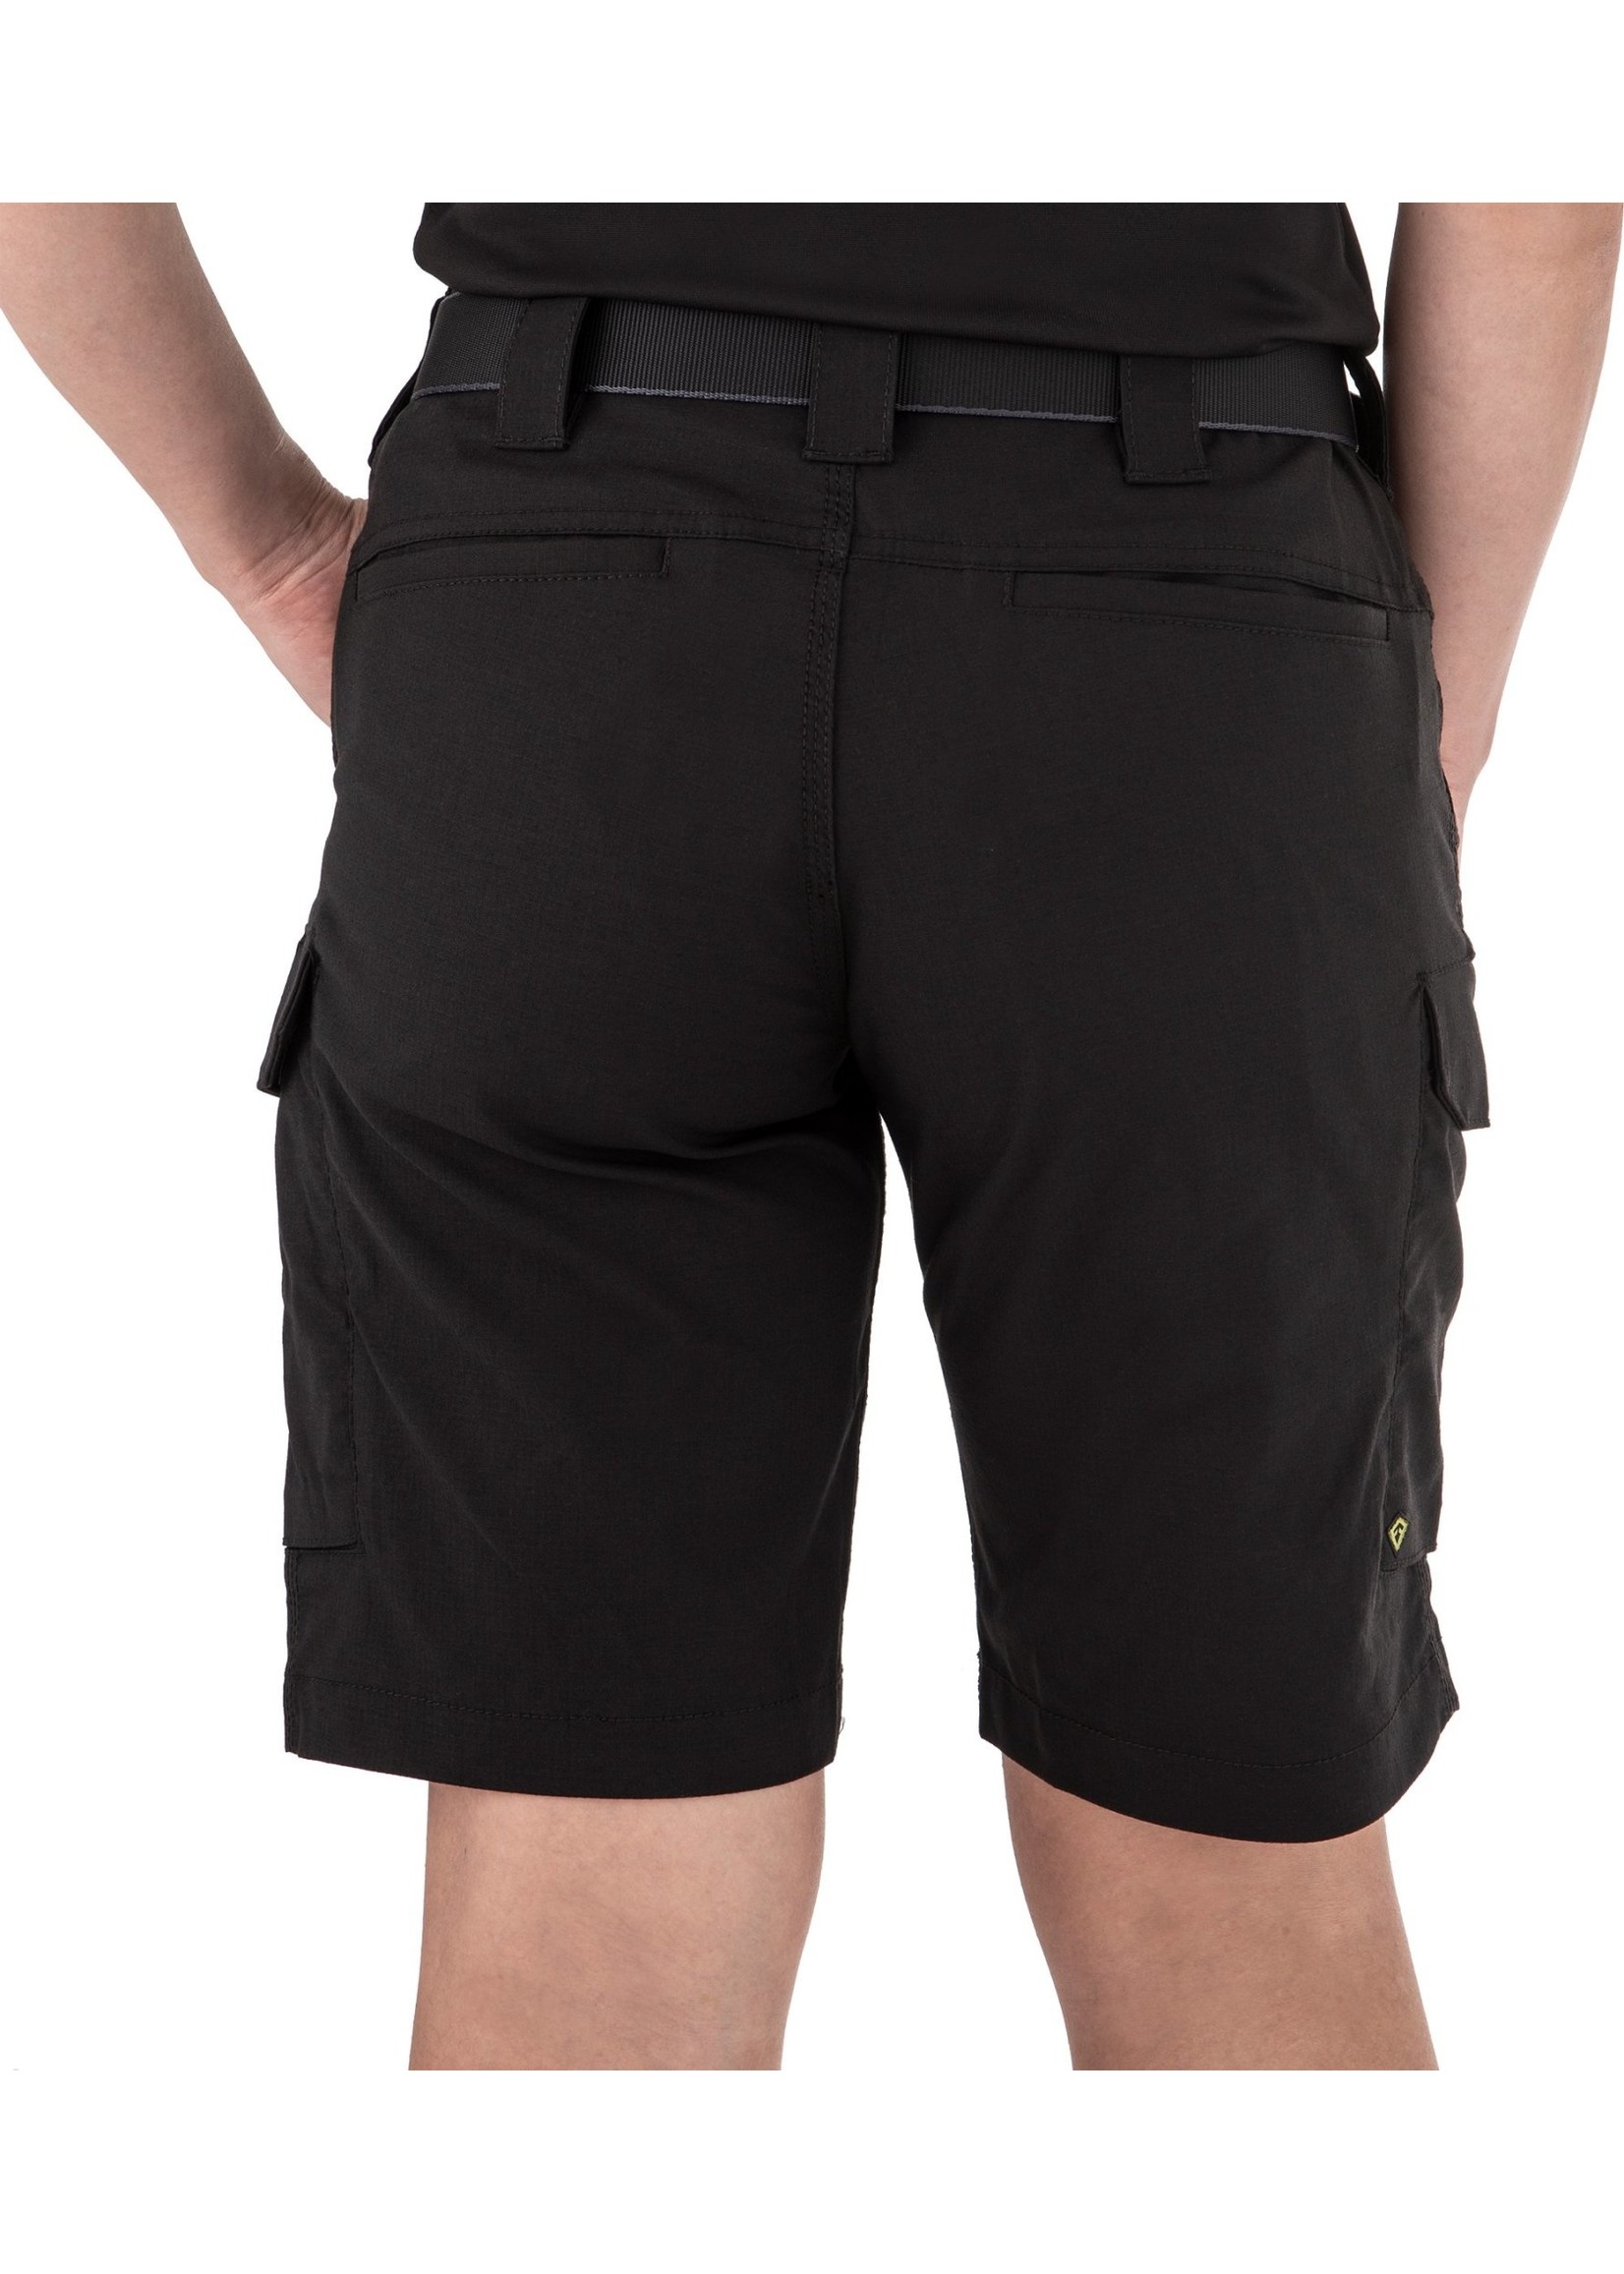 First Tactical First Tactical Women's V2 Tactical Shorts